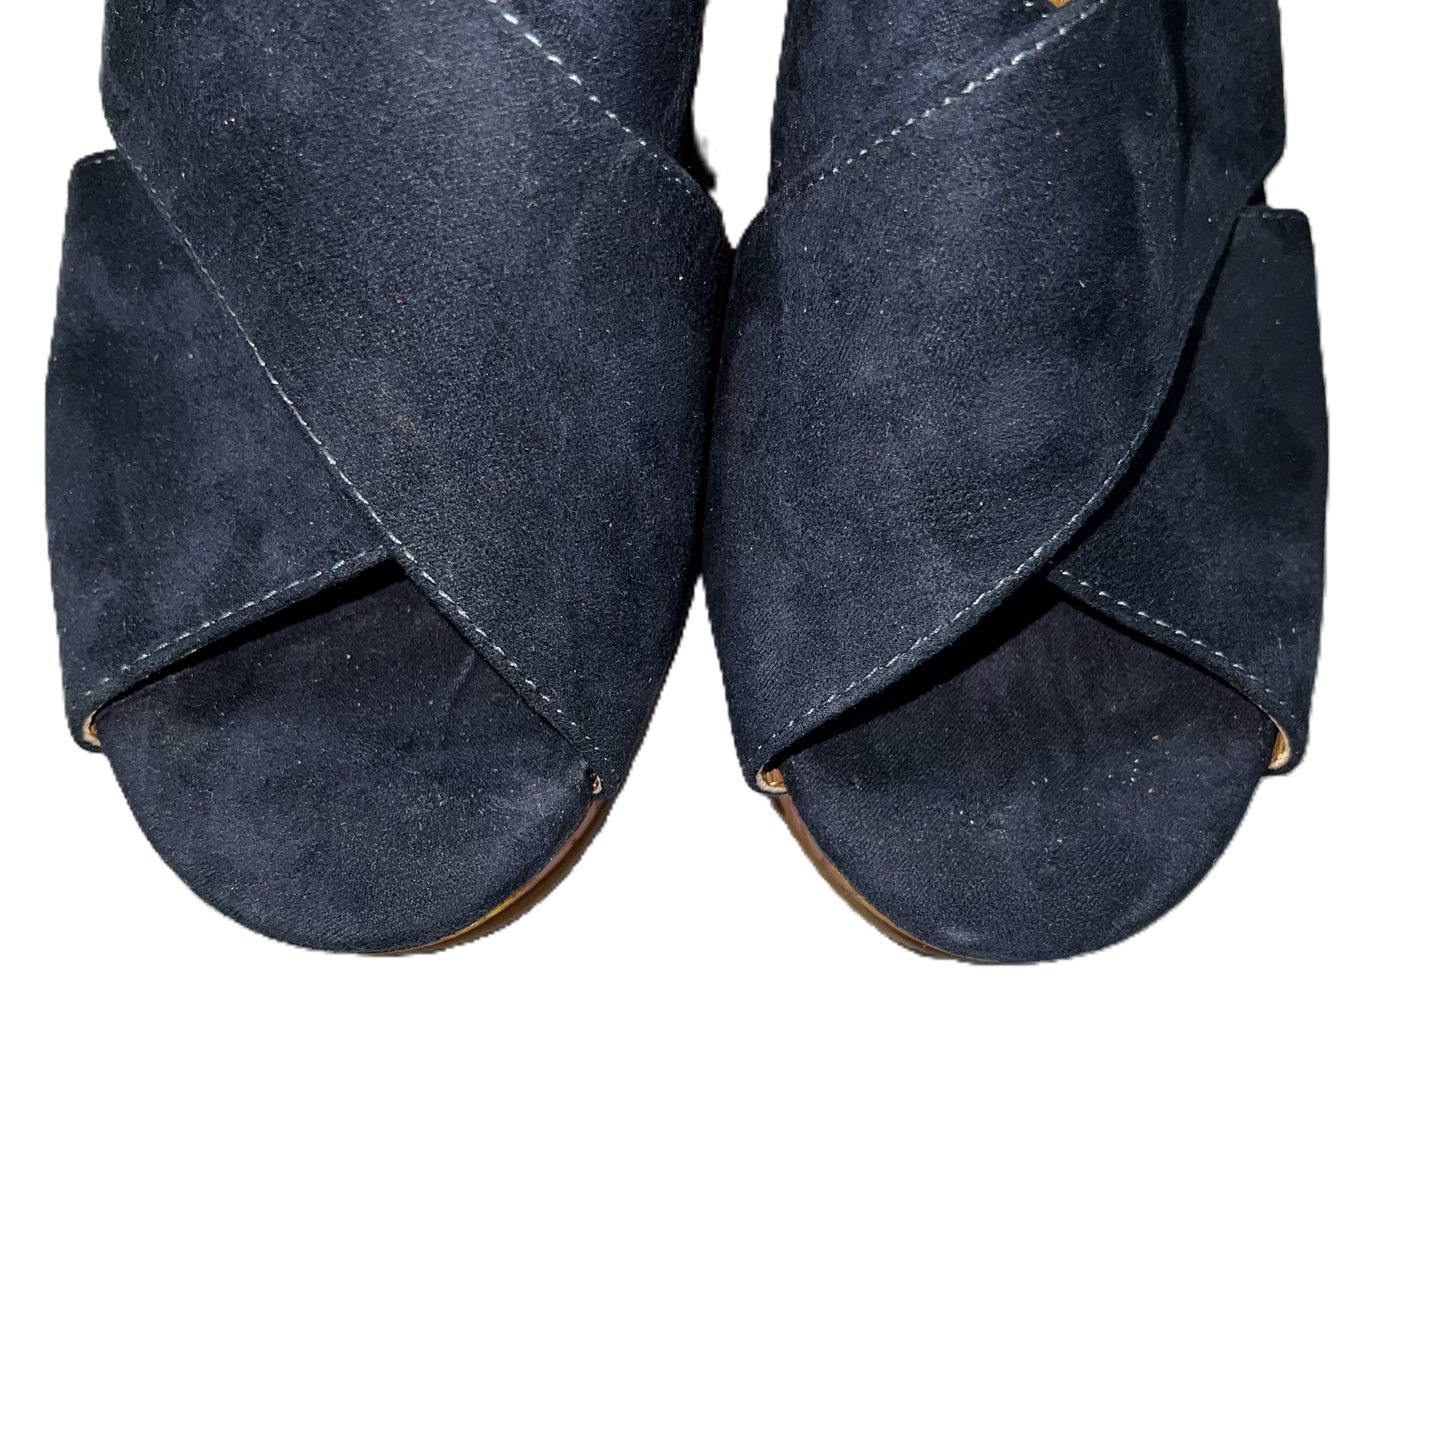 Navy Sandals Heels Wedge By Lucky Brand, Size: 7.5